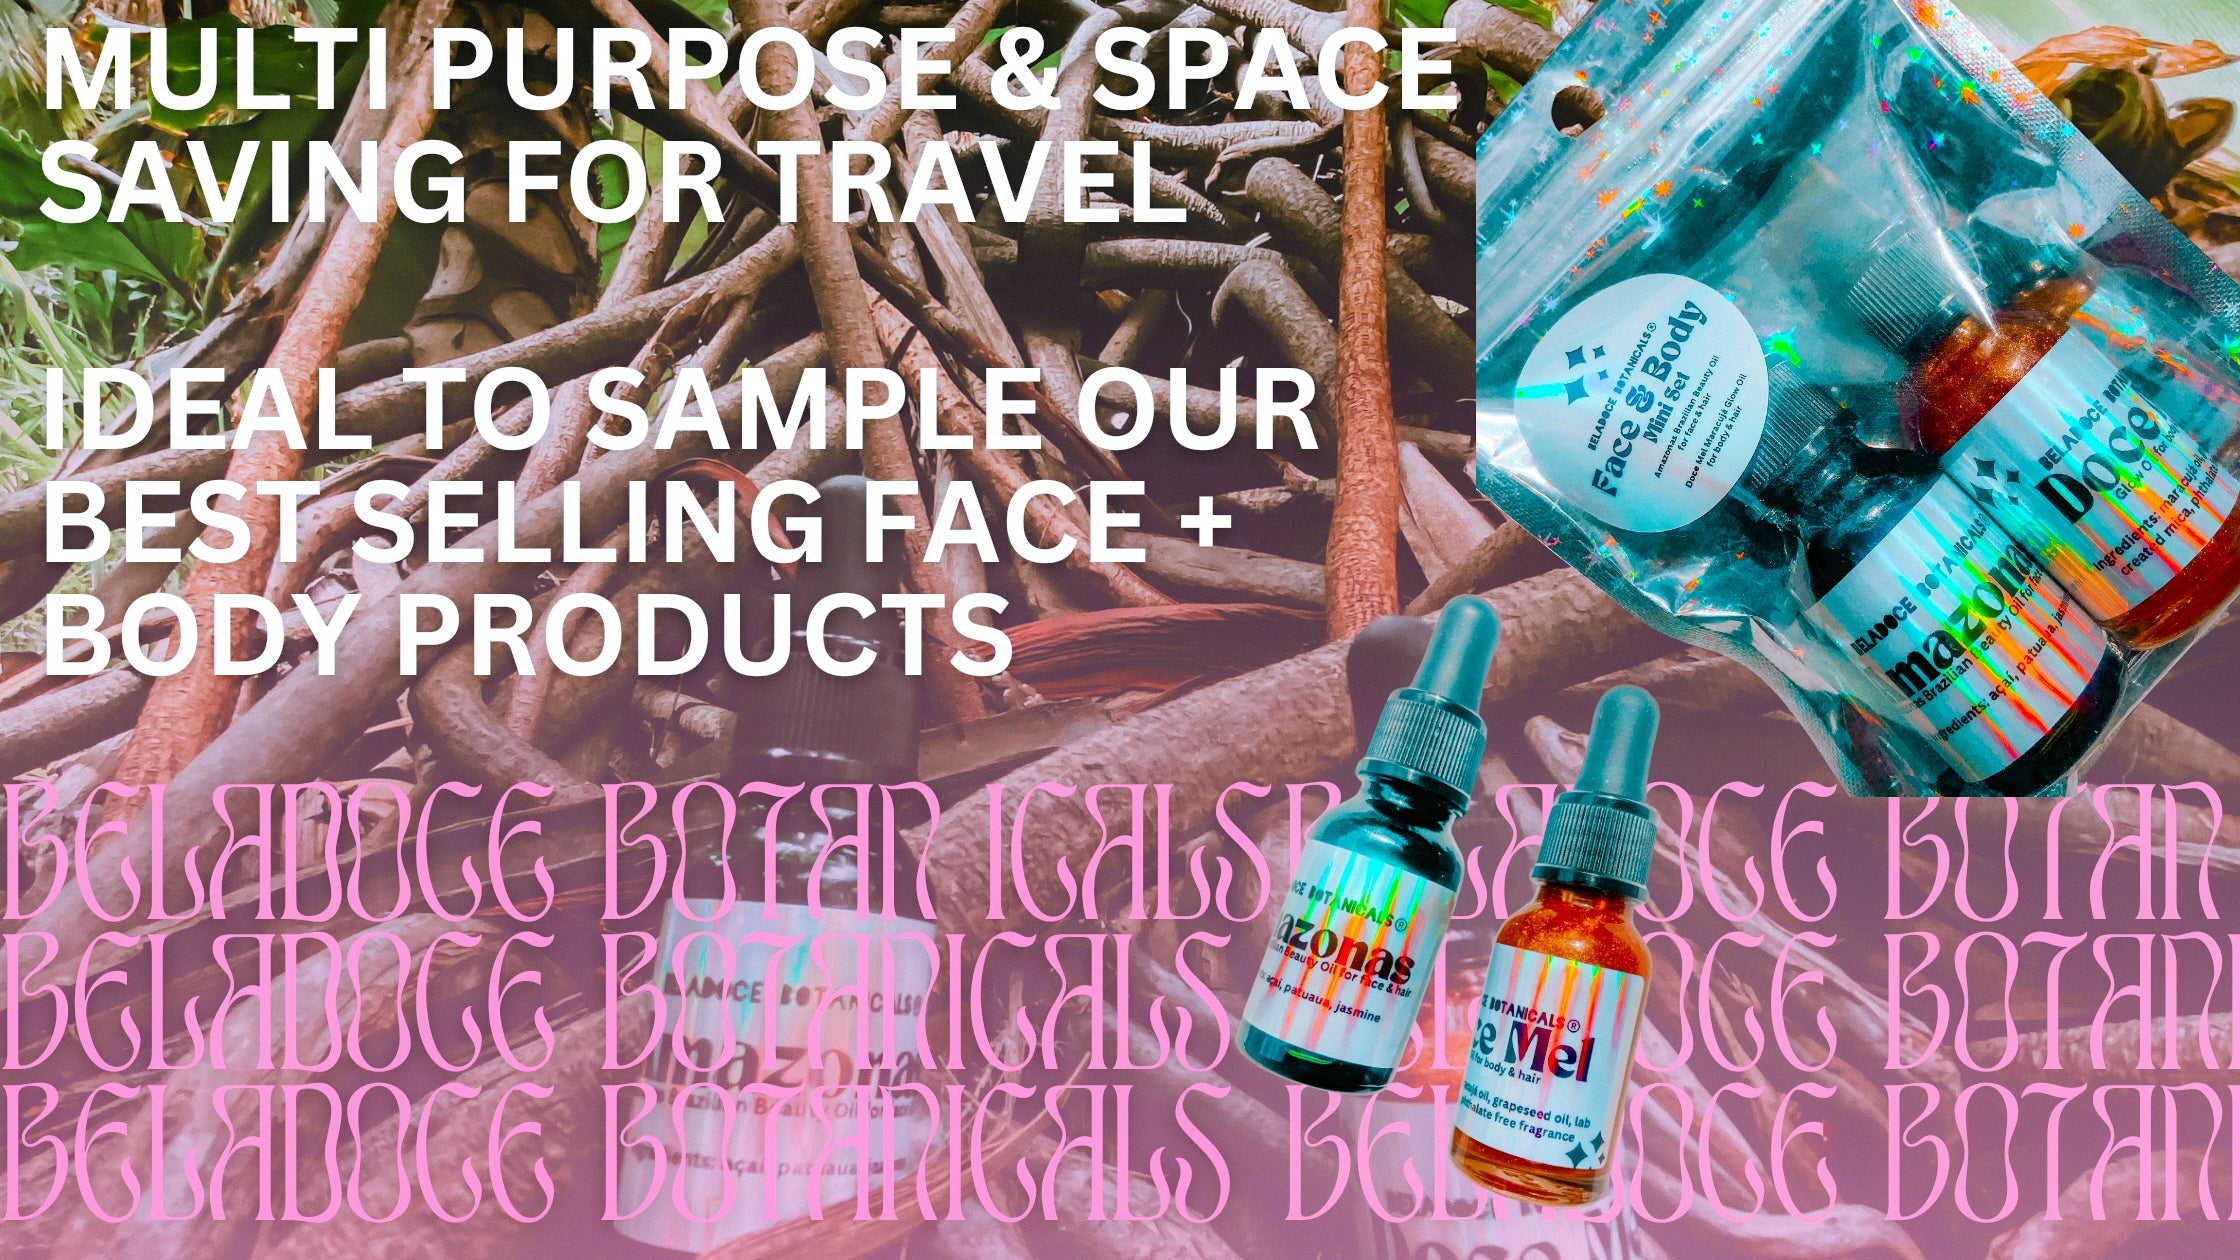 beladoce botanicalsSpace saving for travel. Ideal to sample our best selling face + body products